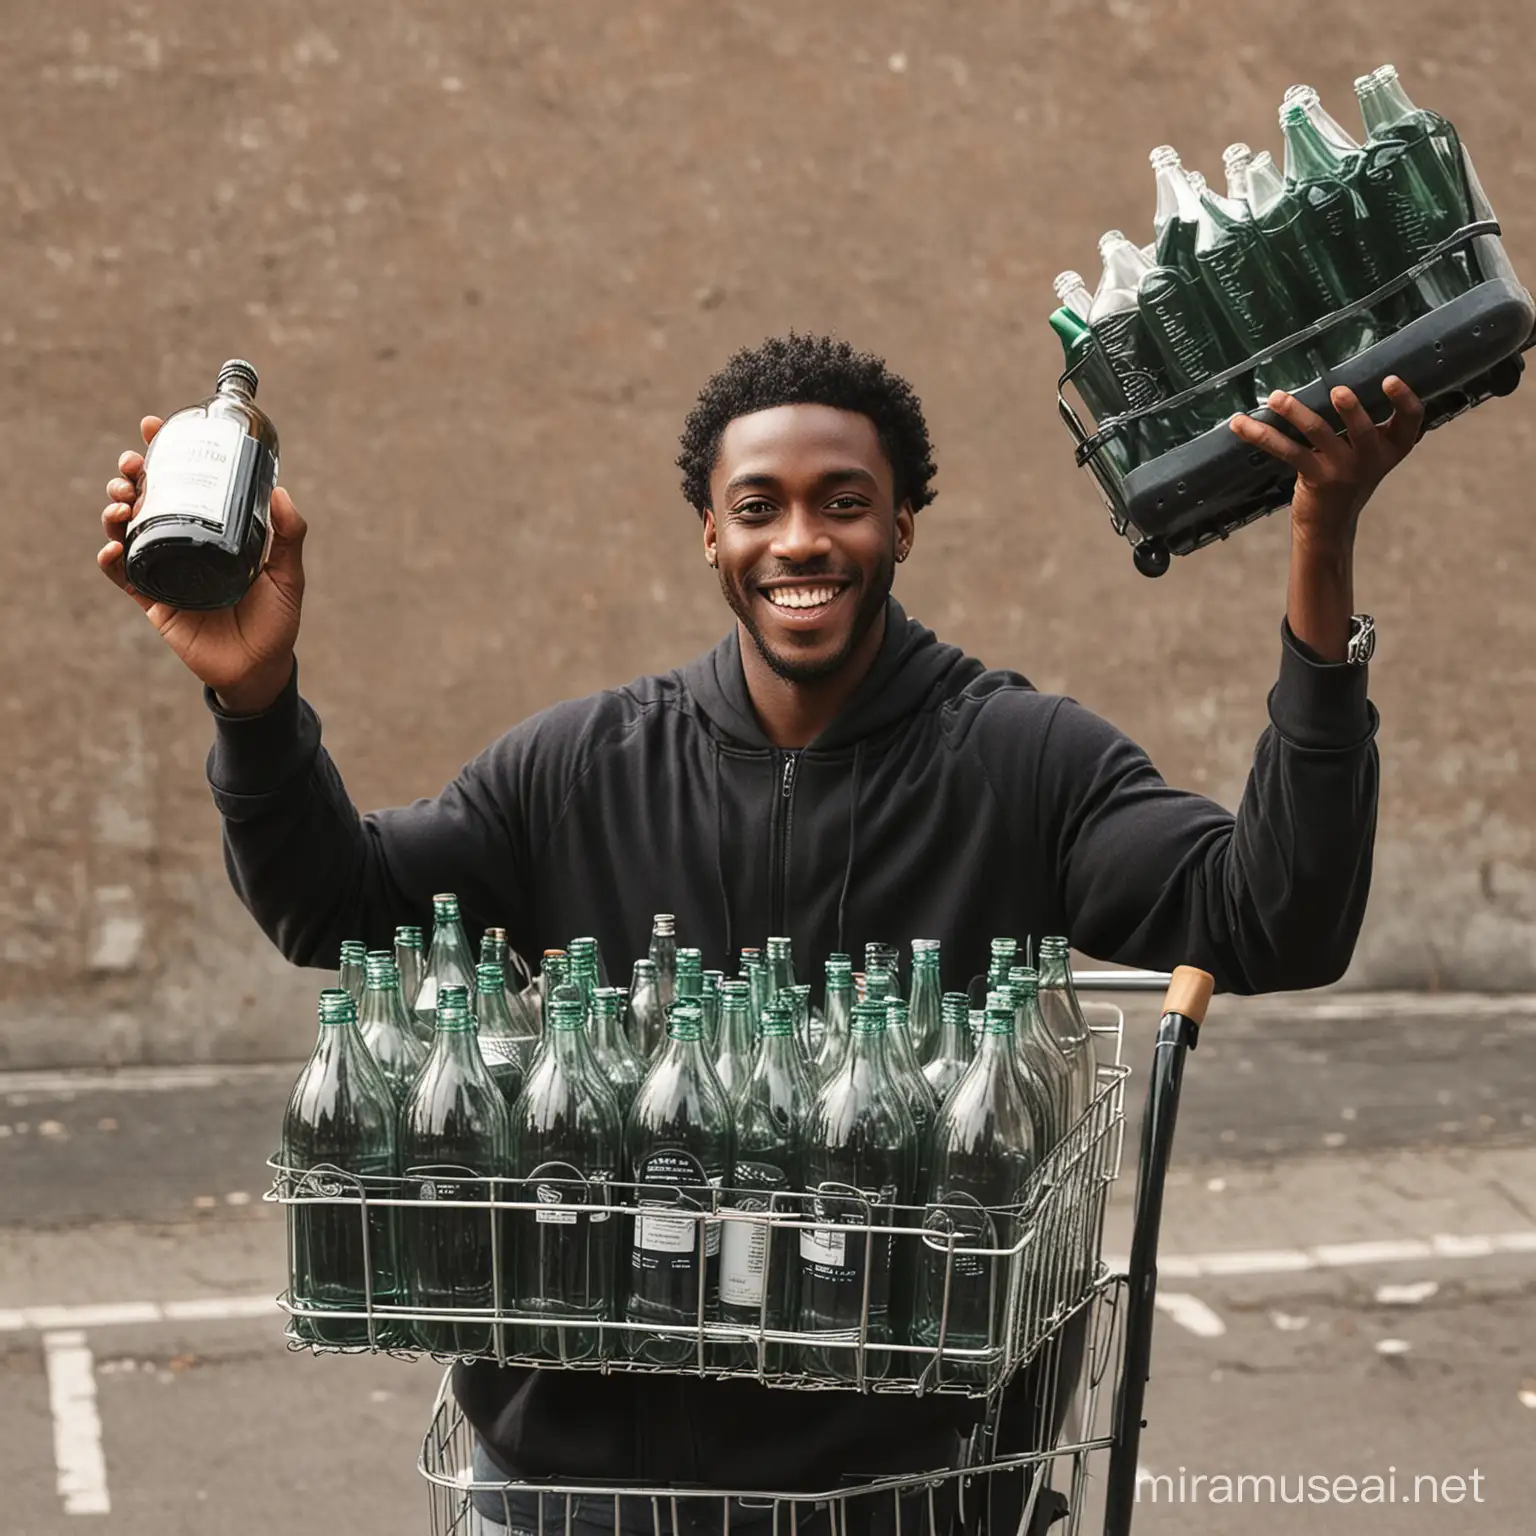 a black guy holding a trolley full of bottles smiling  and waving with one hand
